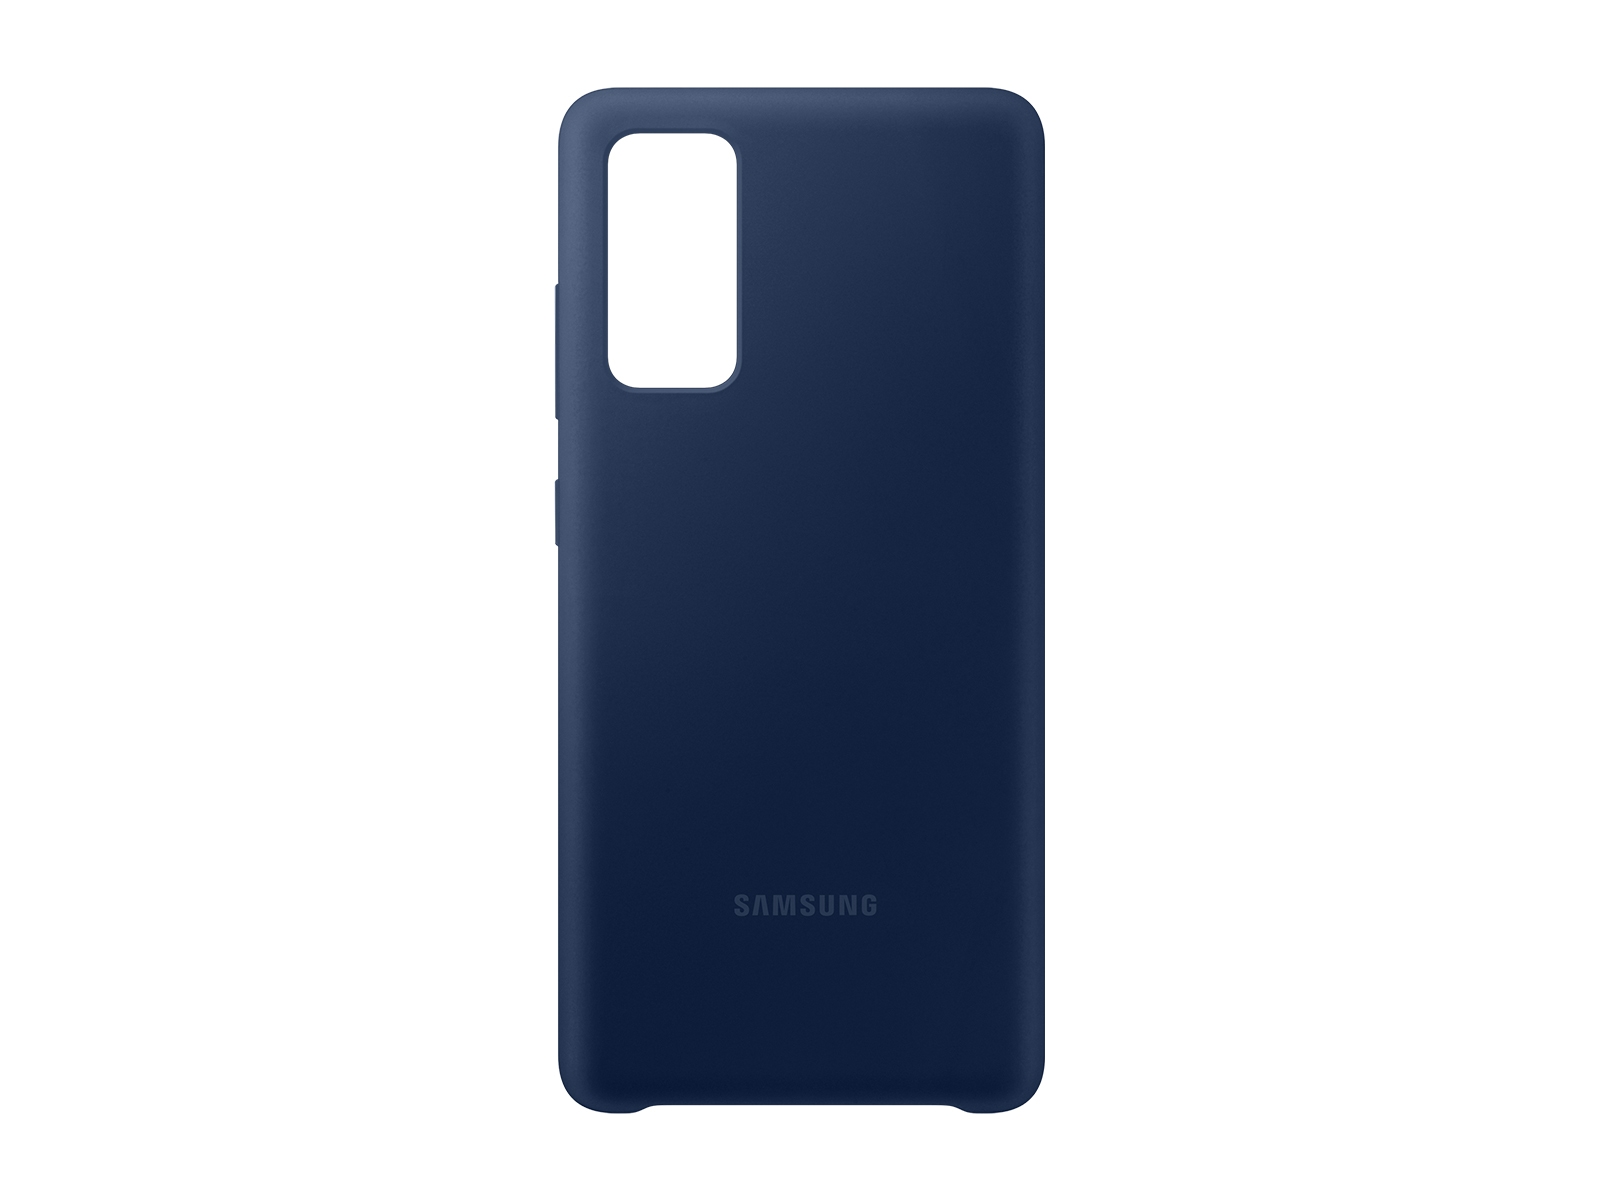 Galaxy S20 FE 5G Silicone Cover, Navy Mobile Accessories - EF-PG780TNEGUS